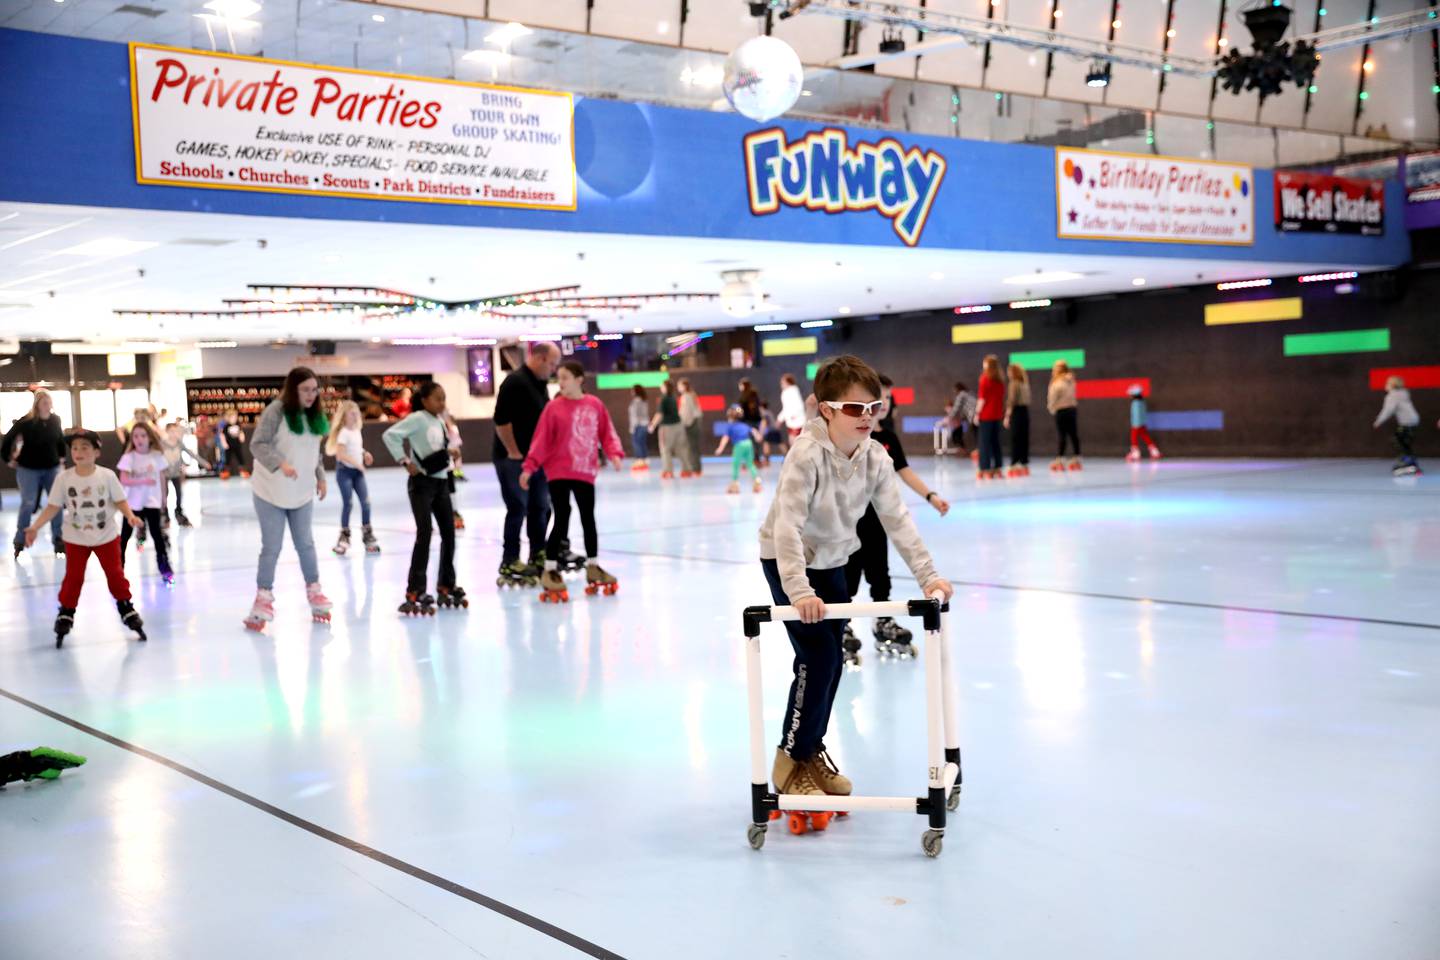 Rollerskaters take to the rink during a winter break open skate session at Funway in Batavia.